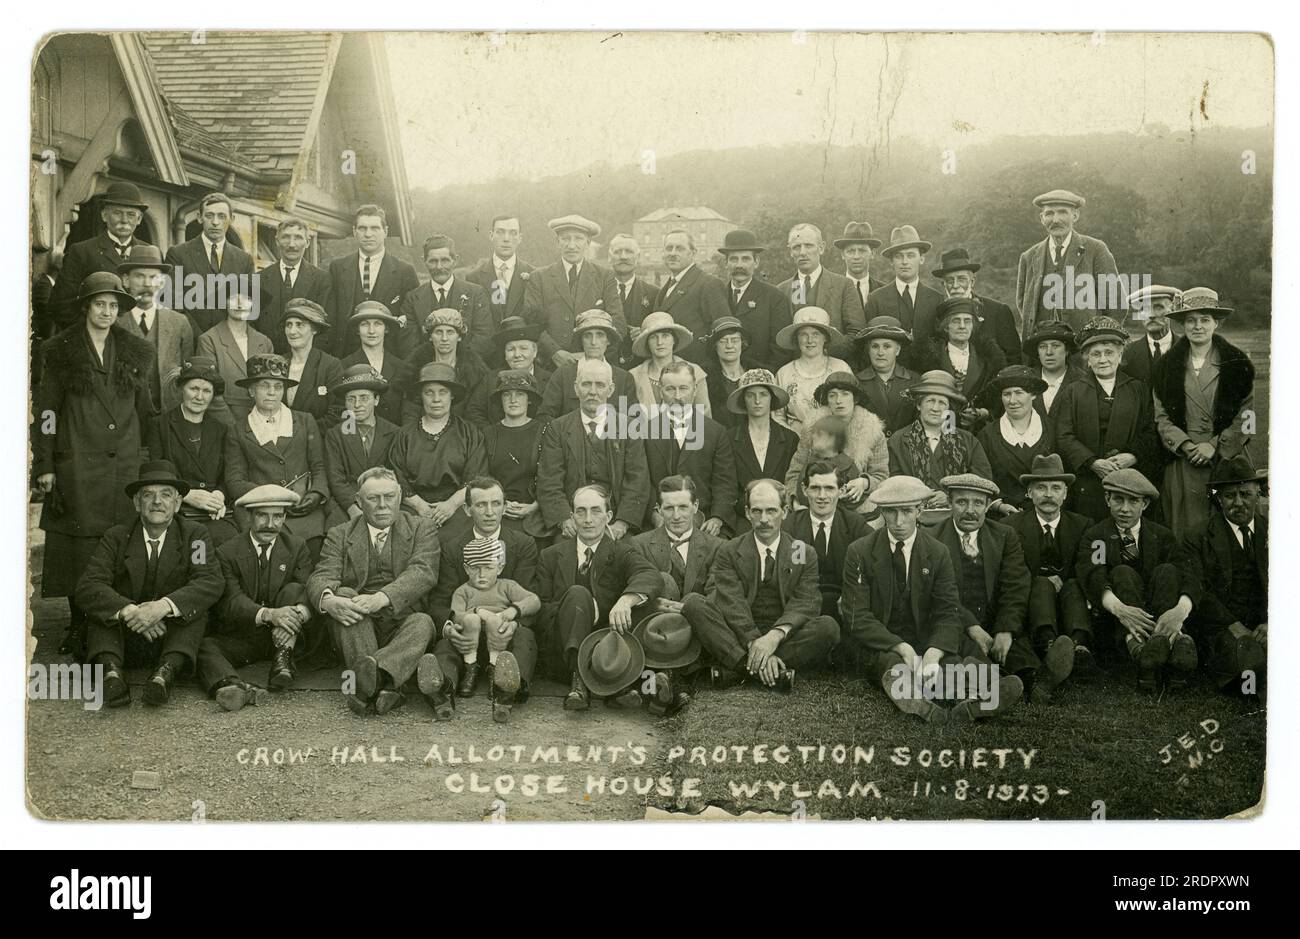 Original early 1920's era postcard of a large group of men and women posing for a portrait in the grounds of a country house called Close House.. The postcard states that they are the Crow Hall  Allotments Protection Society, Close House, Wylam, Northumberland, U.K.  dated 11.8.1923. It appears this group of allotment holders travelled from Crow Hall, Felling, Gateshead (near Newcastle) to the country house called Close House (seen in background) Perhaps it was a charabanc day trip to a country home or the country estate was used as venue for a convention / meeting. Stock Photo